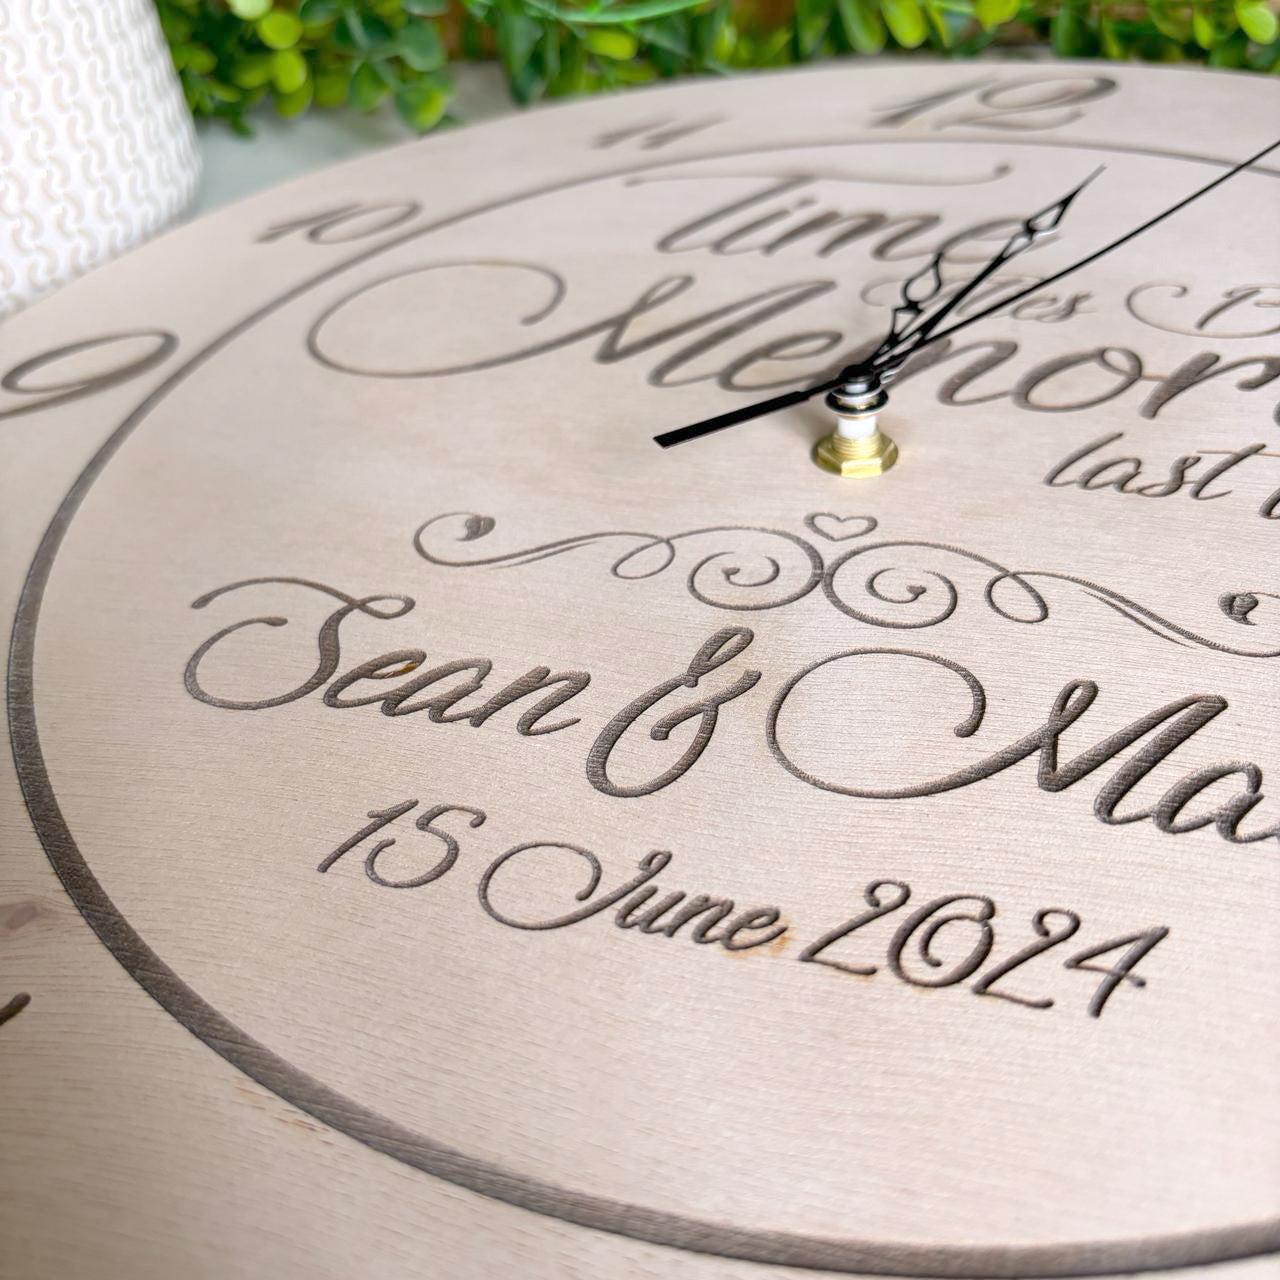 Time Flies but Memories Last Forever Personalized Engraved Clock